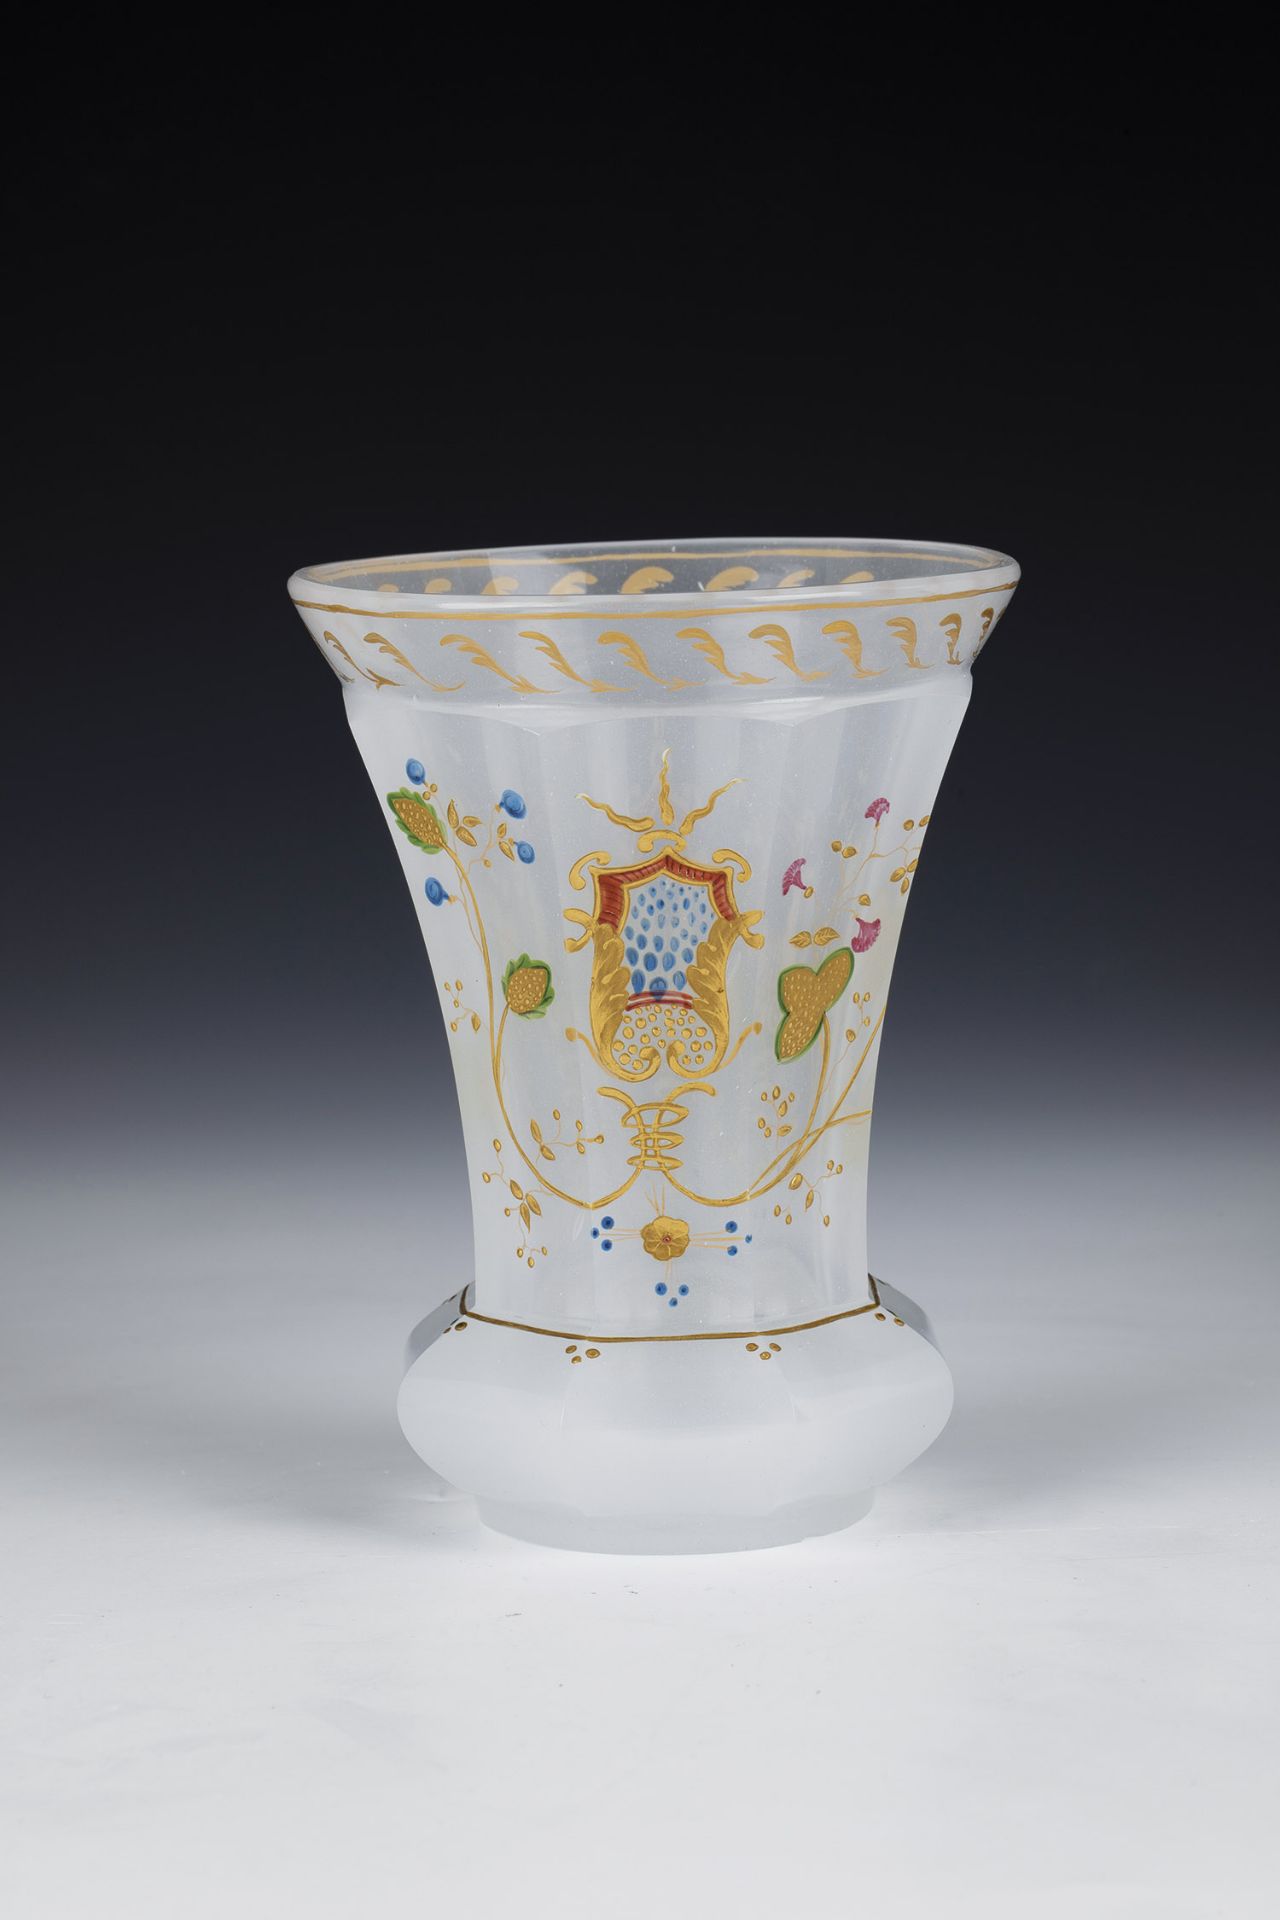 Ranft beaker Bohemia, M. 19th century White alabaster glass. Multi-faceted walls with stylized